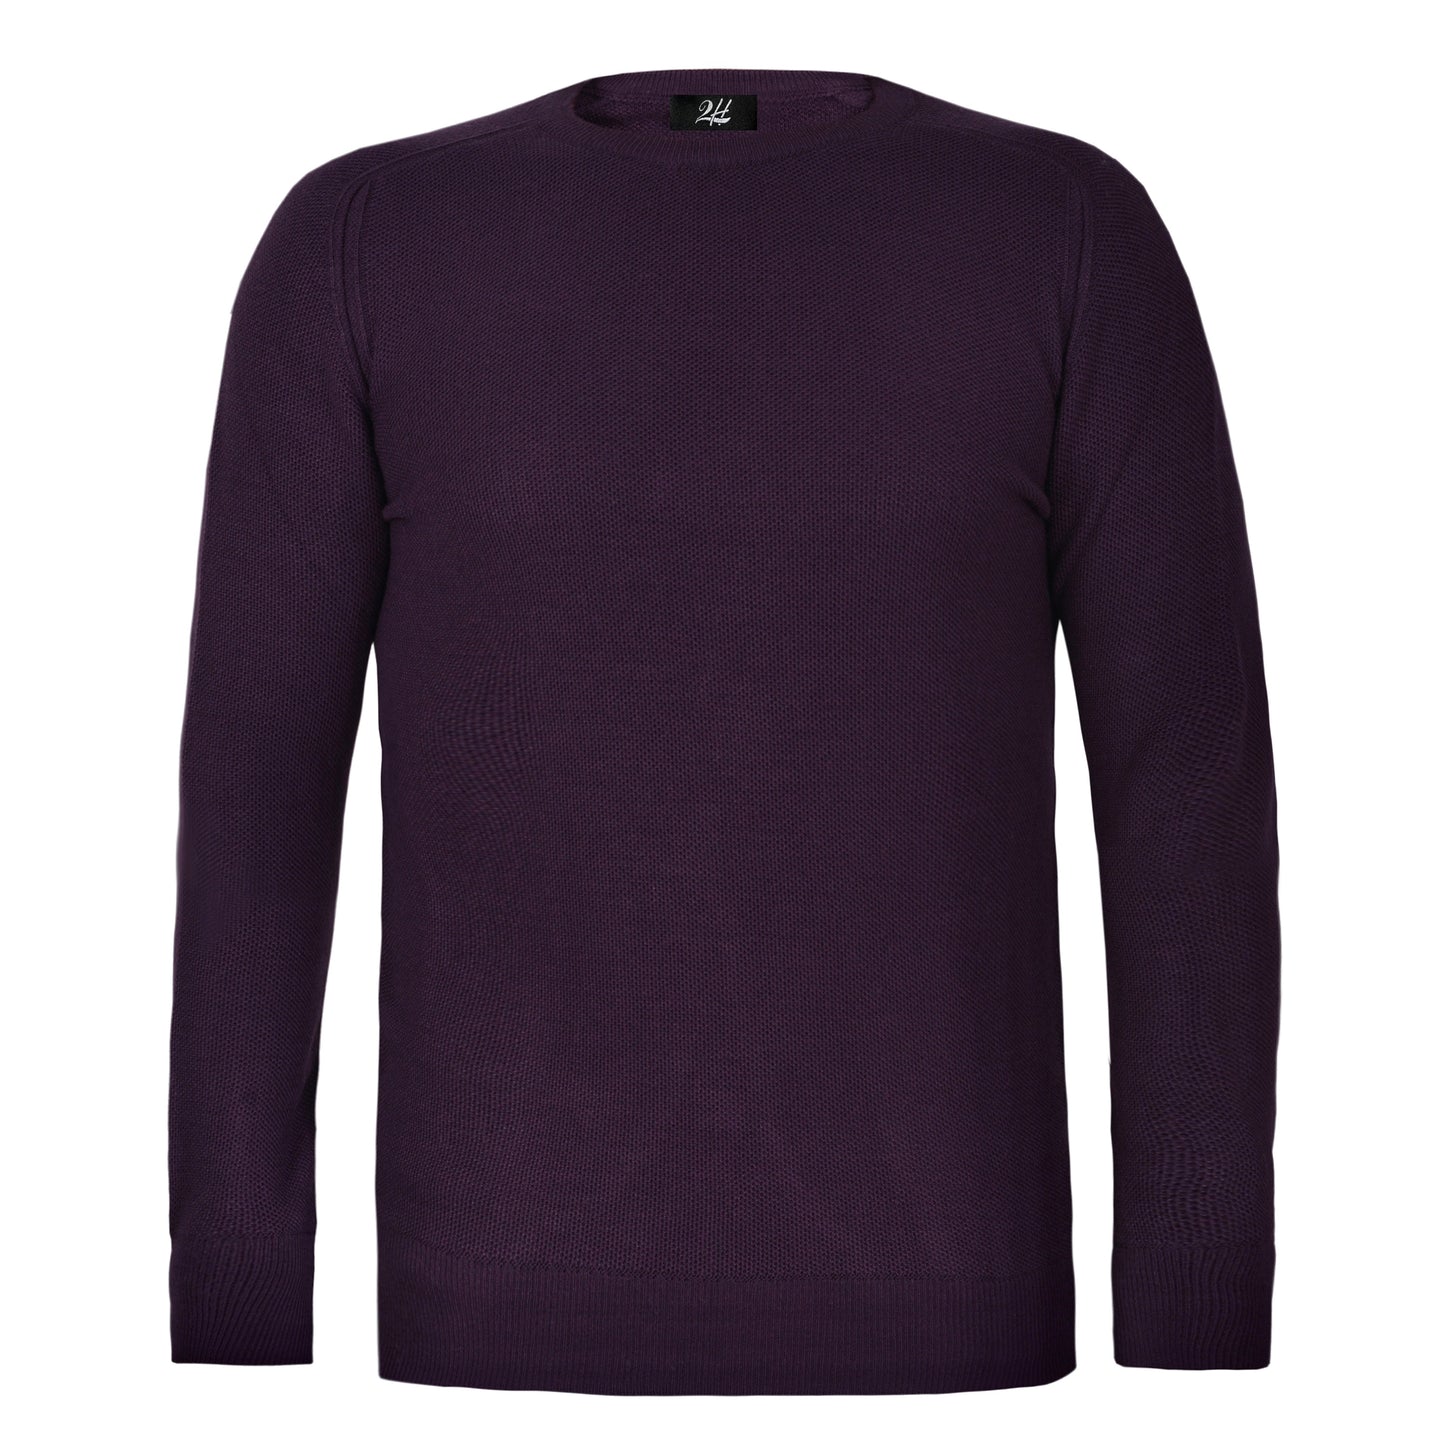 2H Purpel Knitted Round Neck Sweater